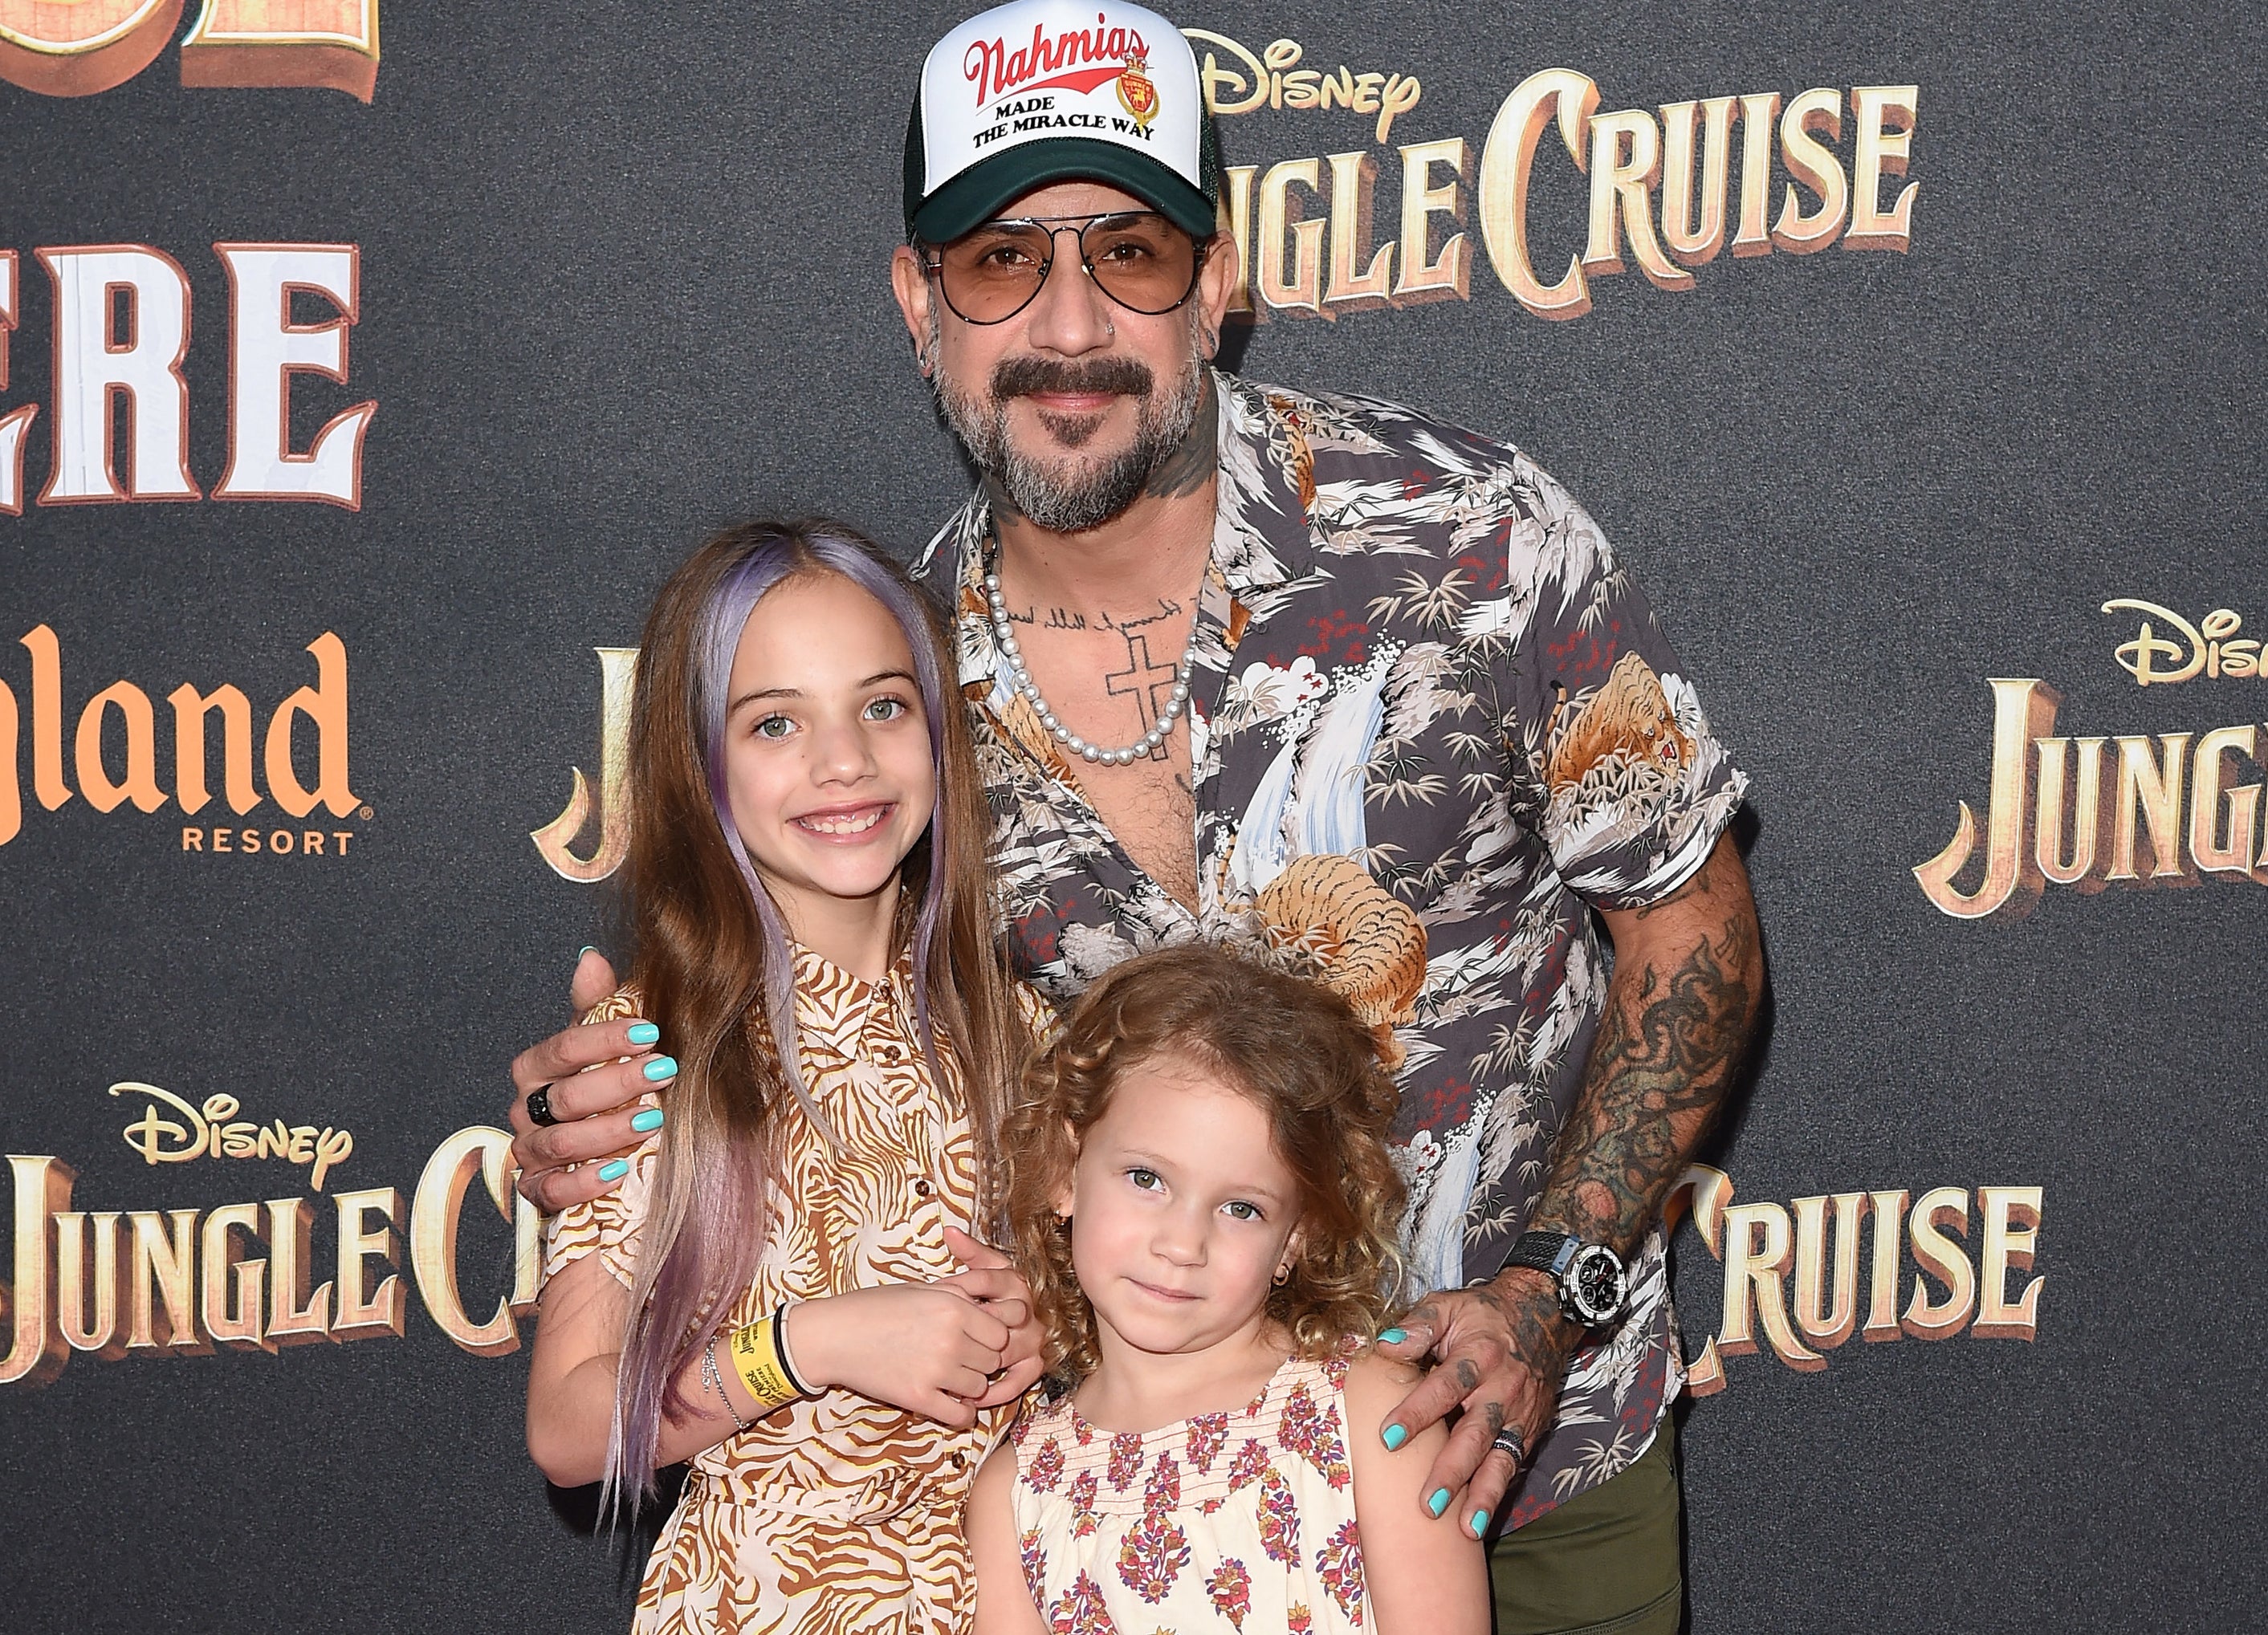 AJ stands with his daughters at an event